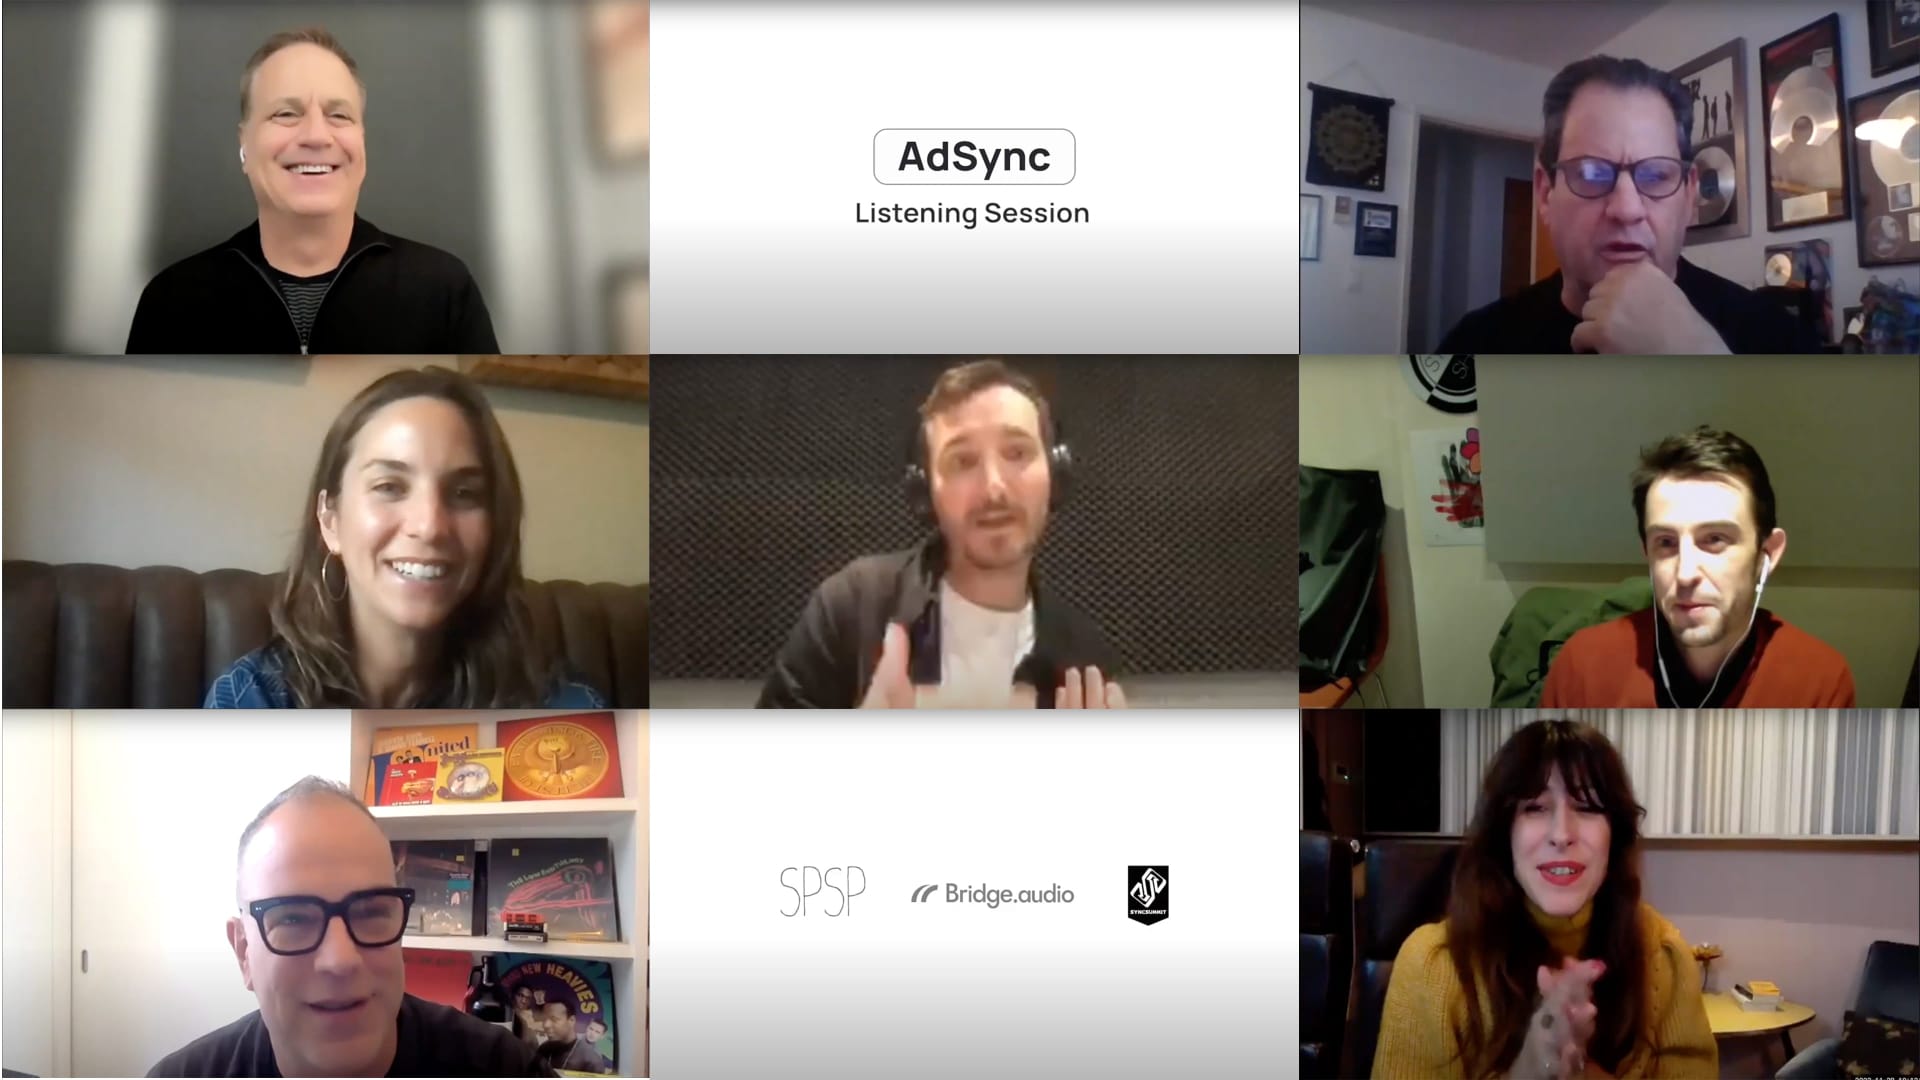 Preview of the panelists for the AdSync listening session